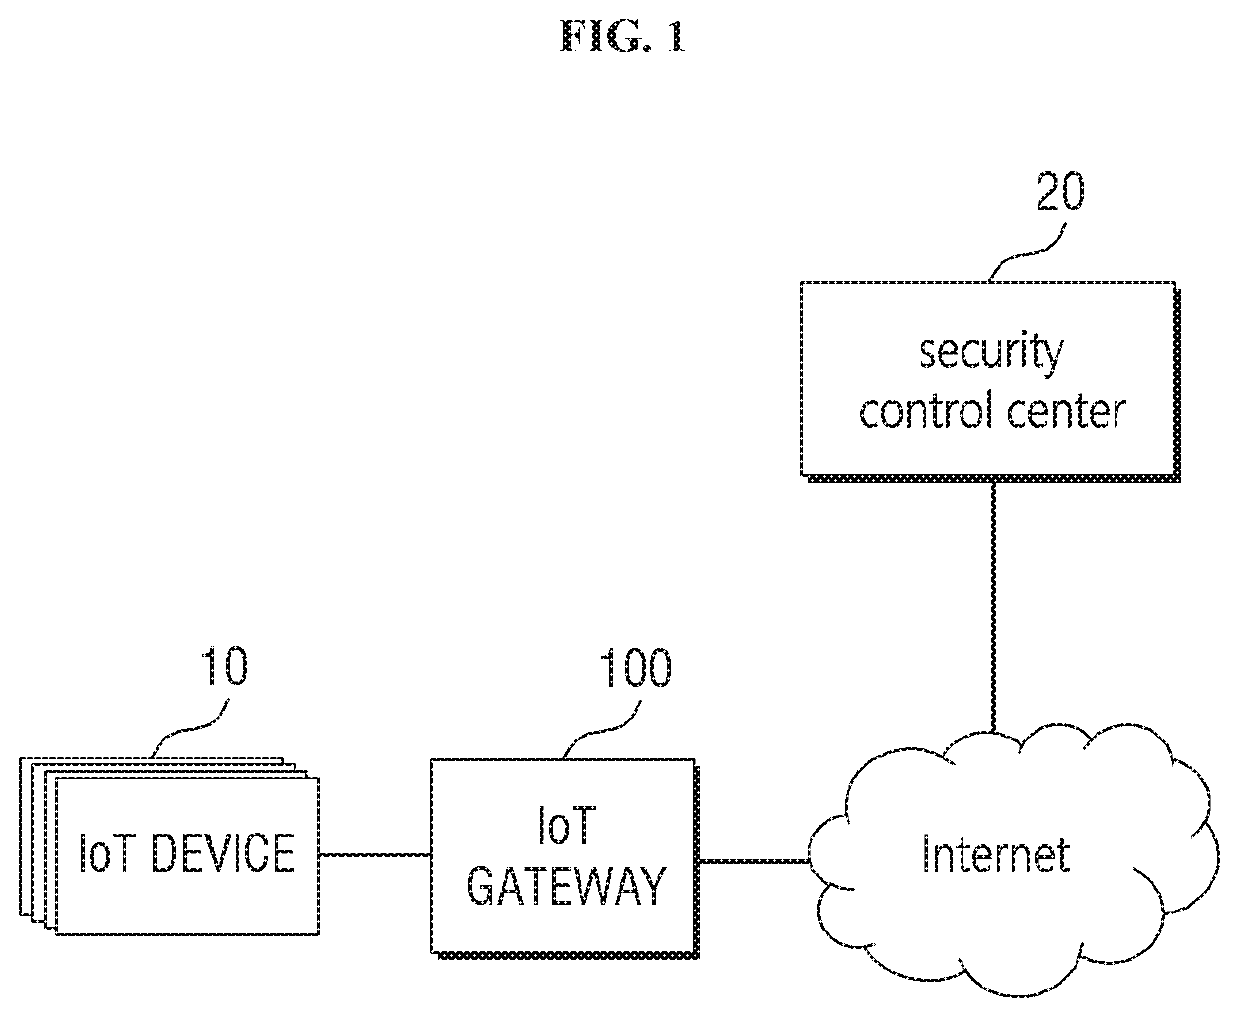 Method and apparatus for managing abnormal behavior of IoT device